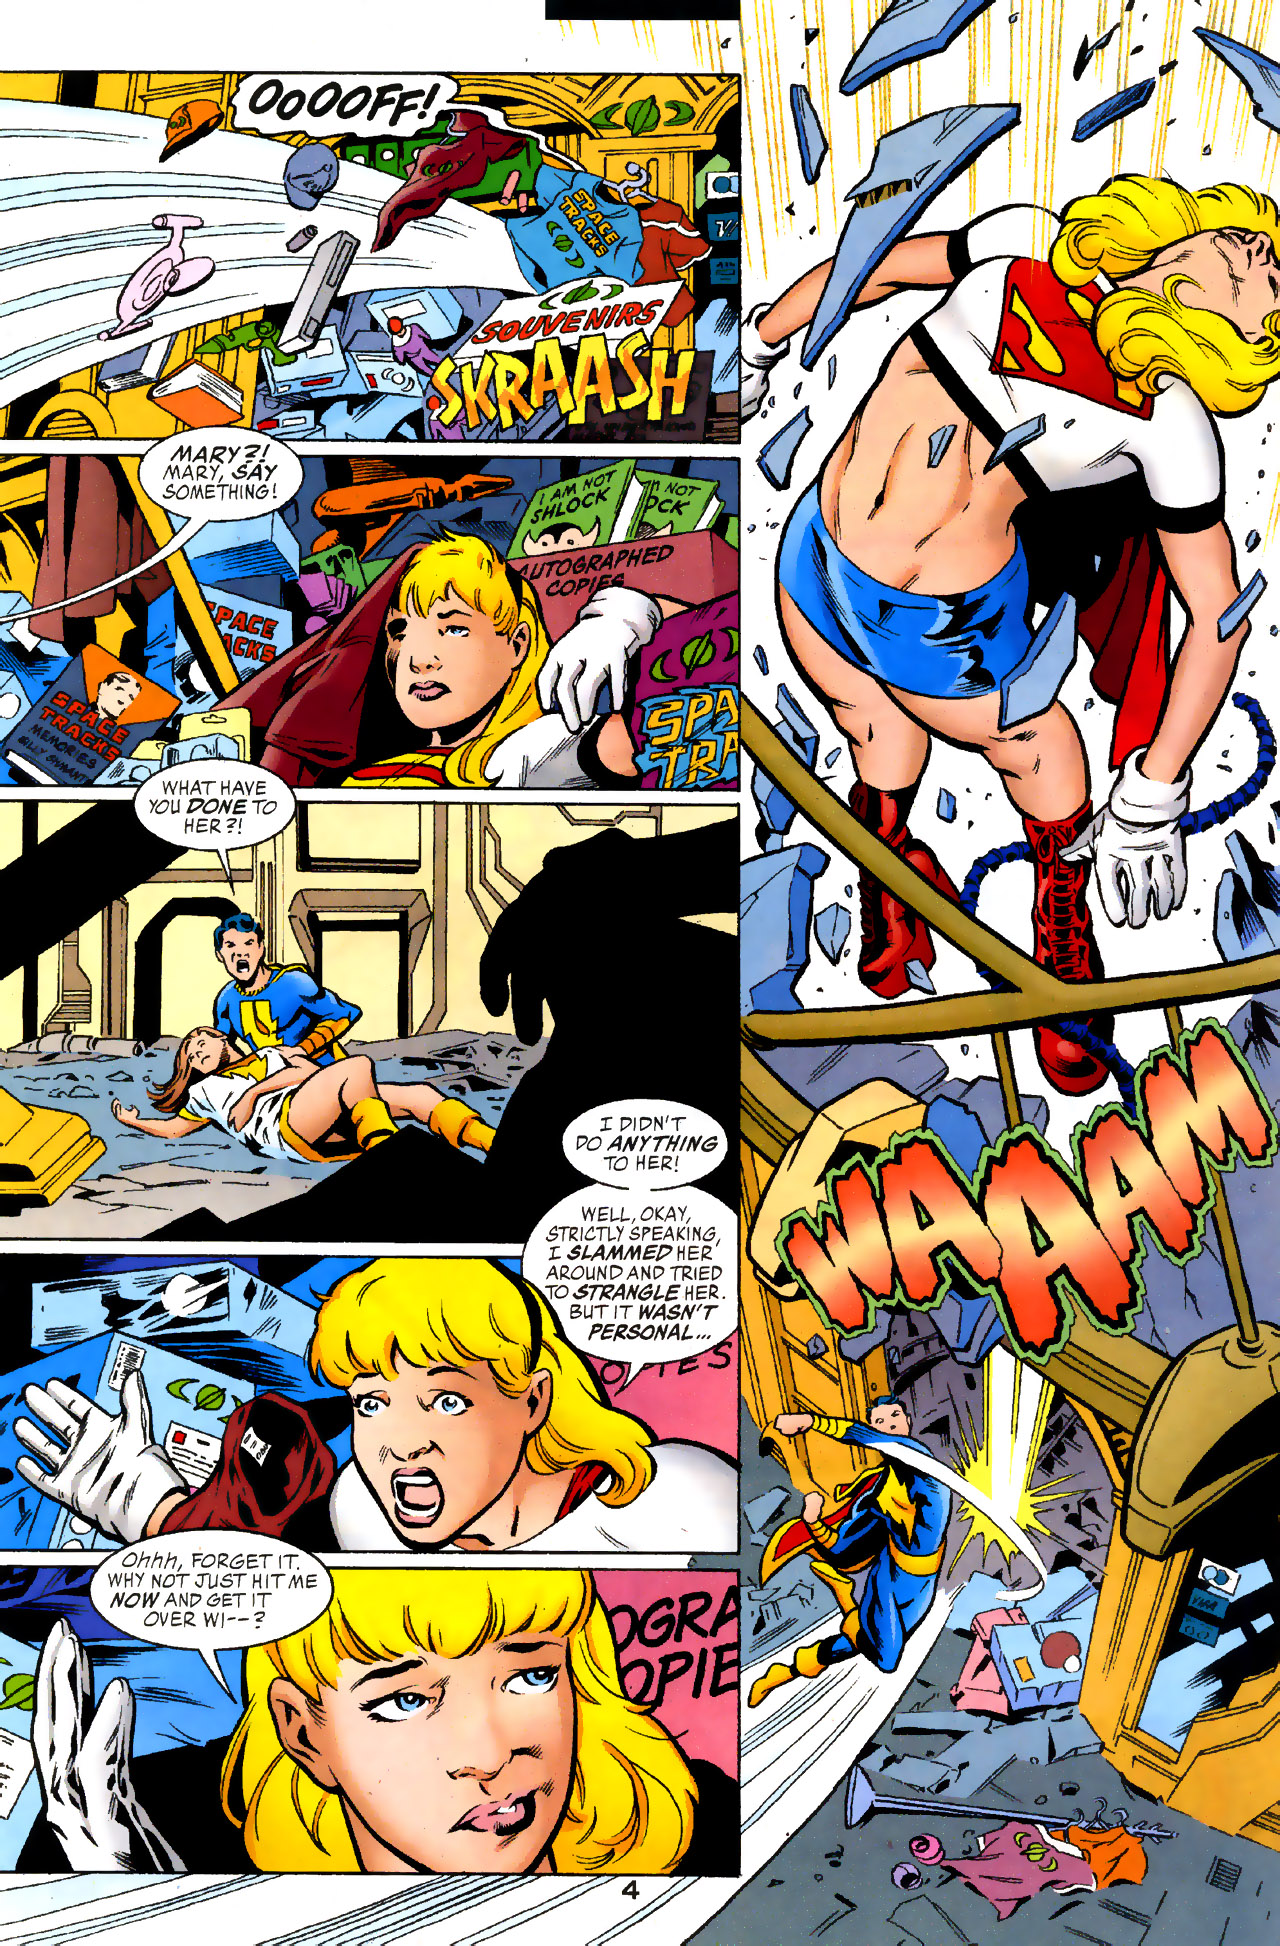 Supergirl (1996) 69 Page 3